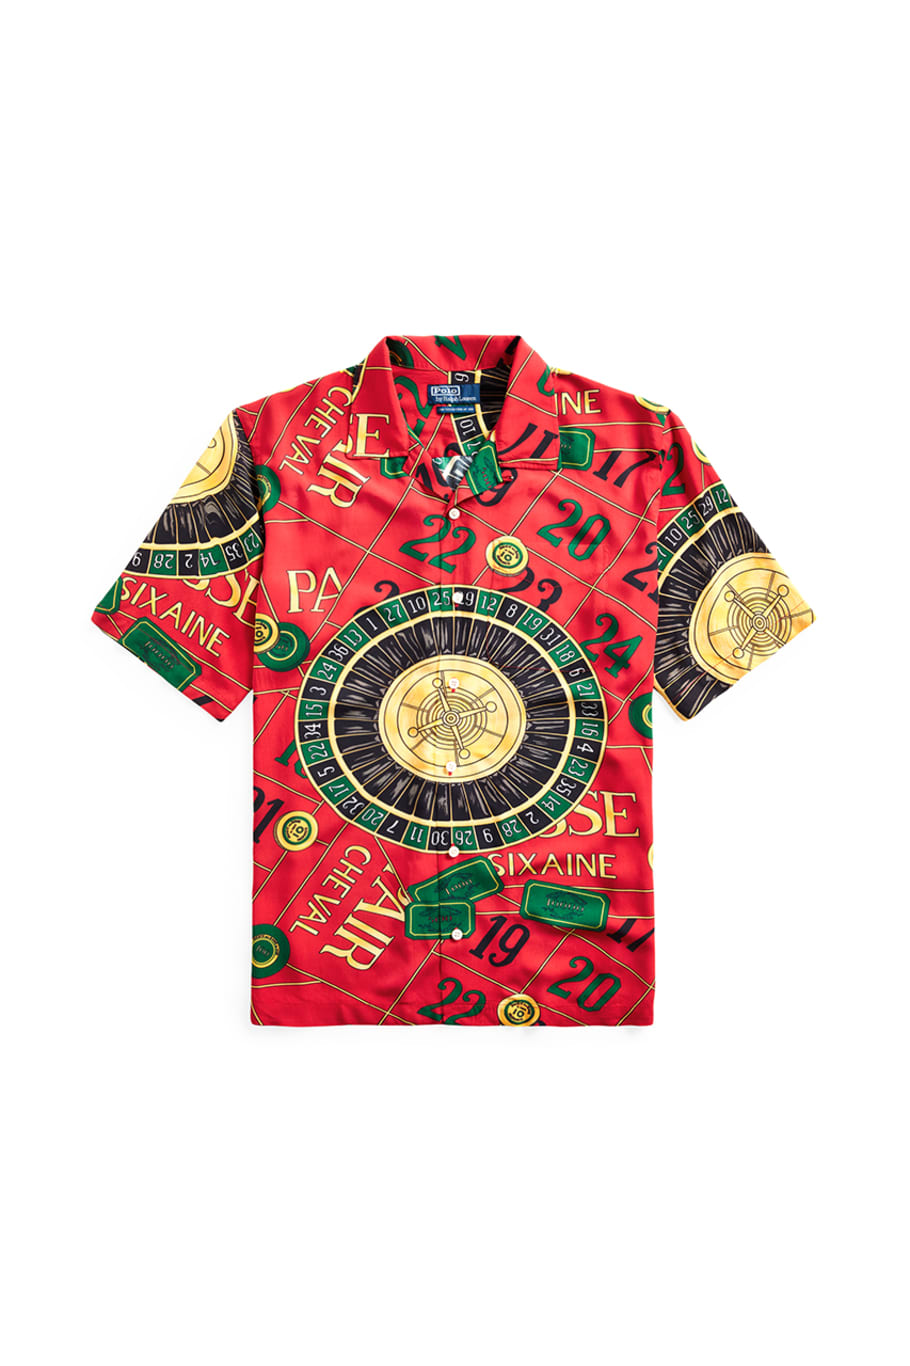 Polo Ralph Lauren Reworks Its Highly Coveted Casino Shirt | Complex